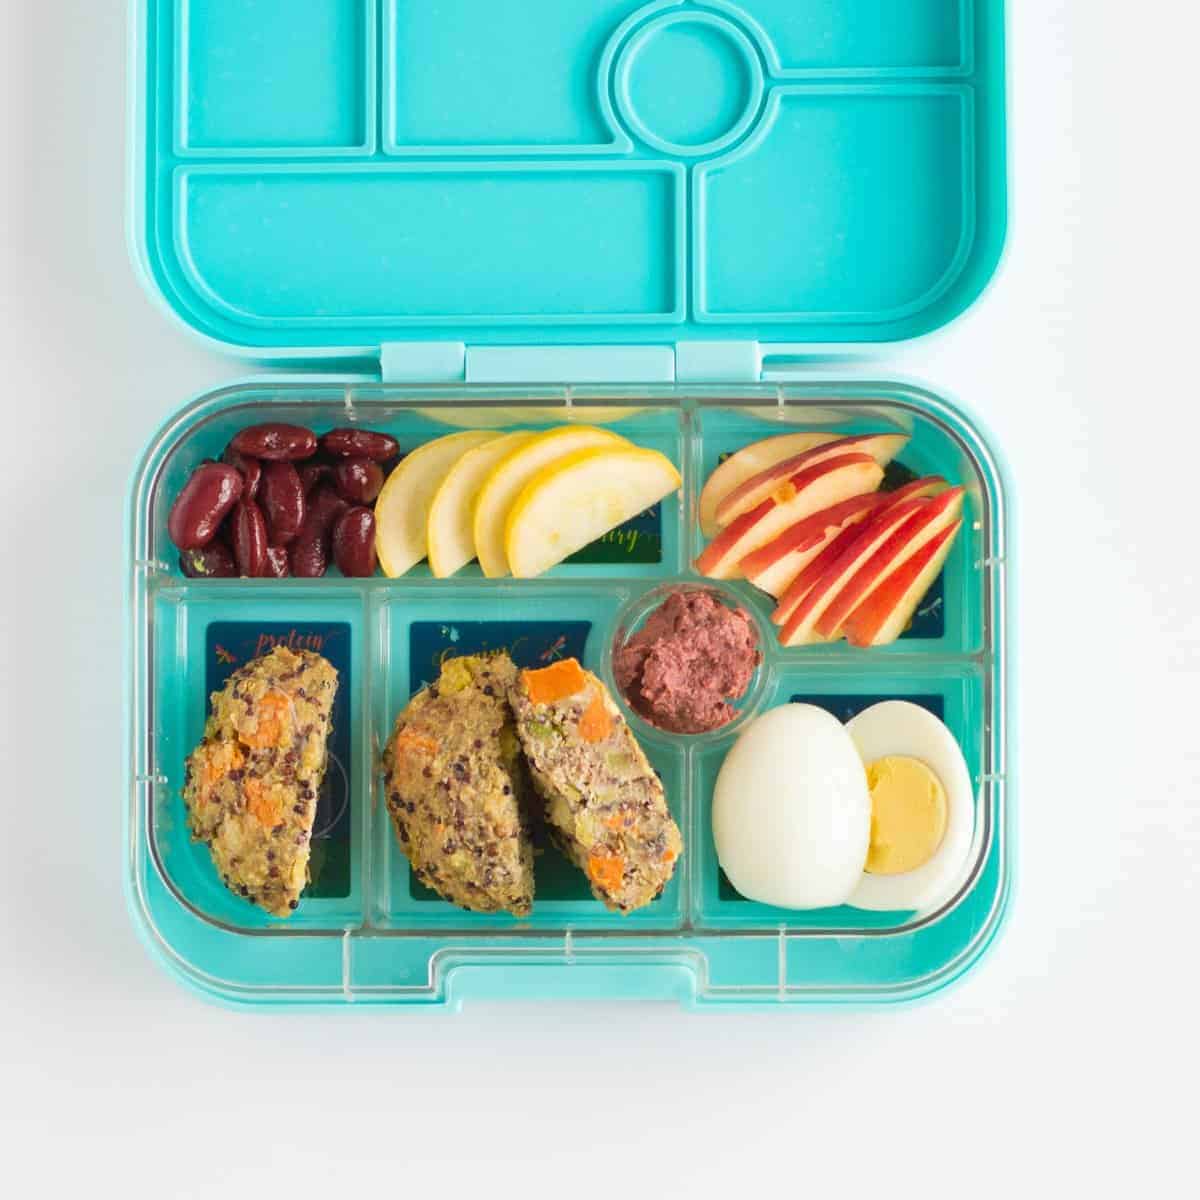 toddler lunchbox with quinoa cakes, hard boiled egg, sliced apples, zucchini, and red kidney beans.